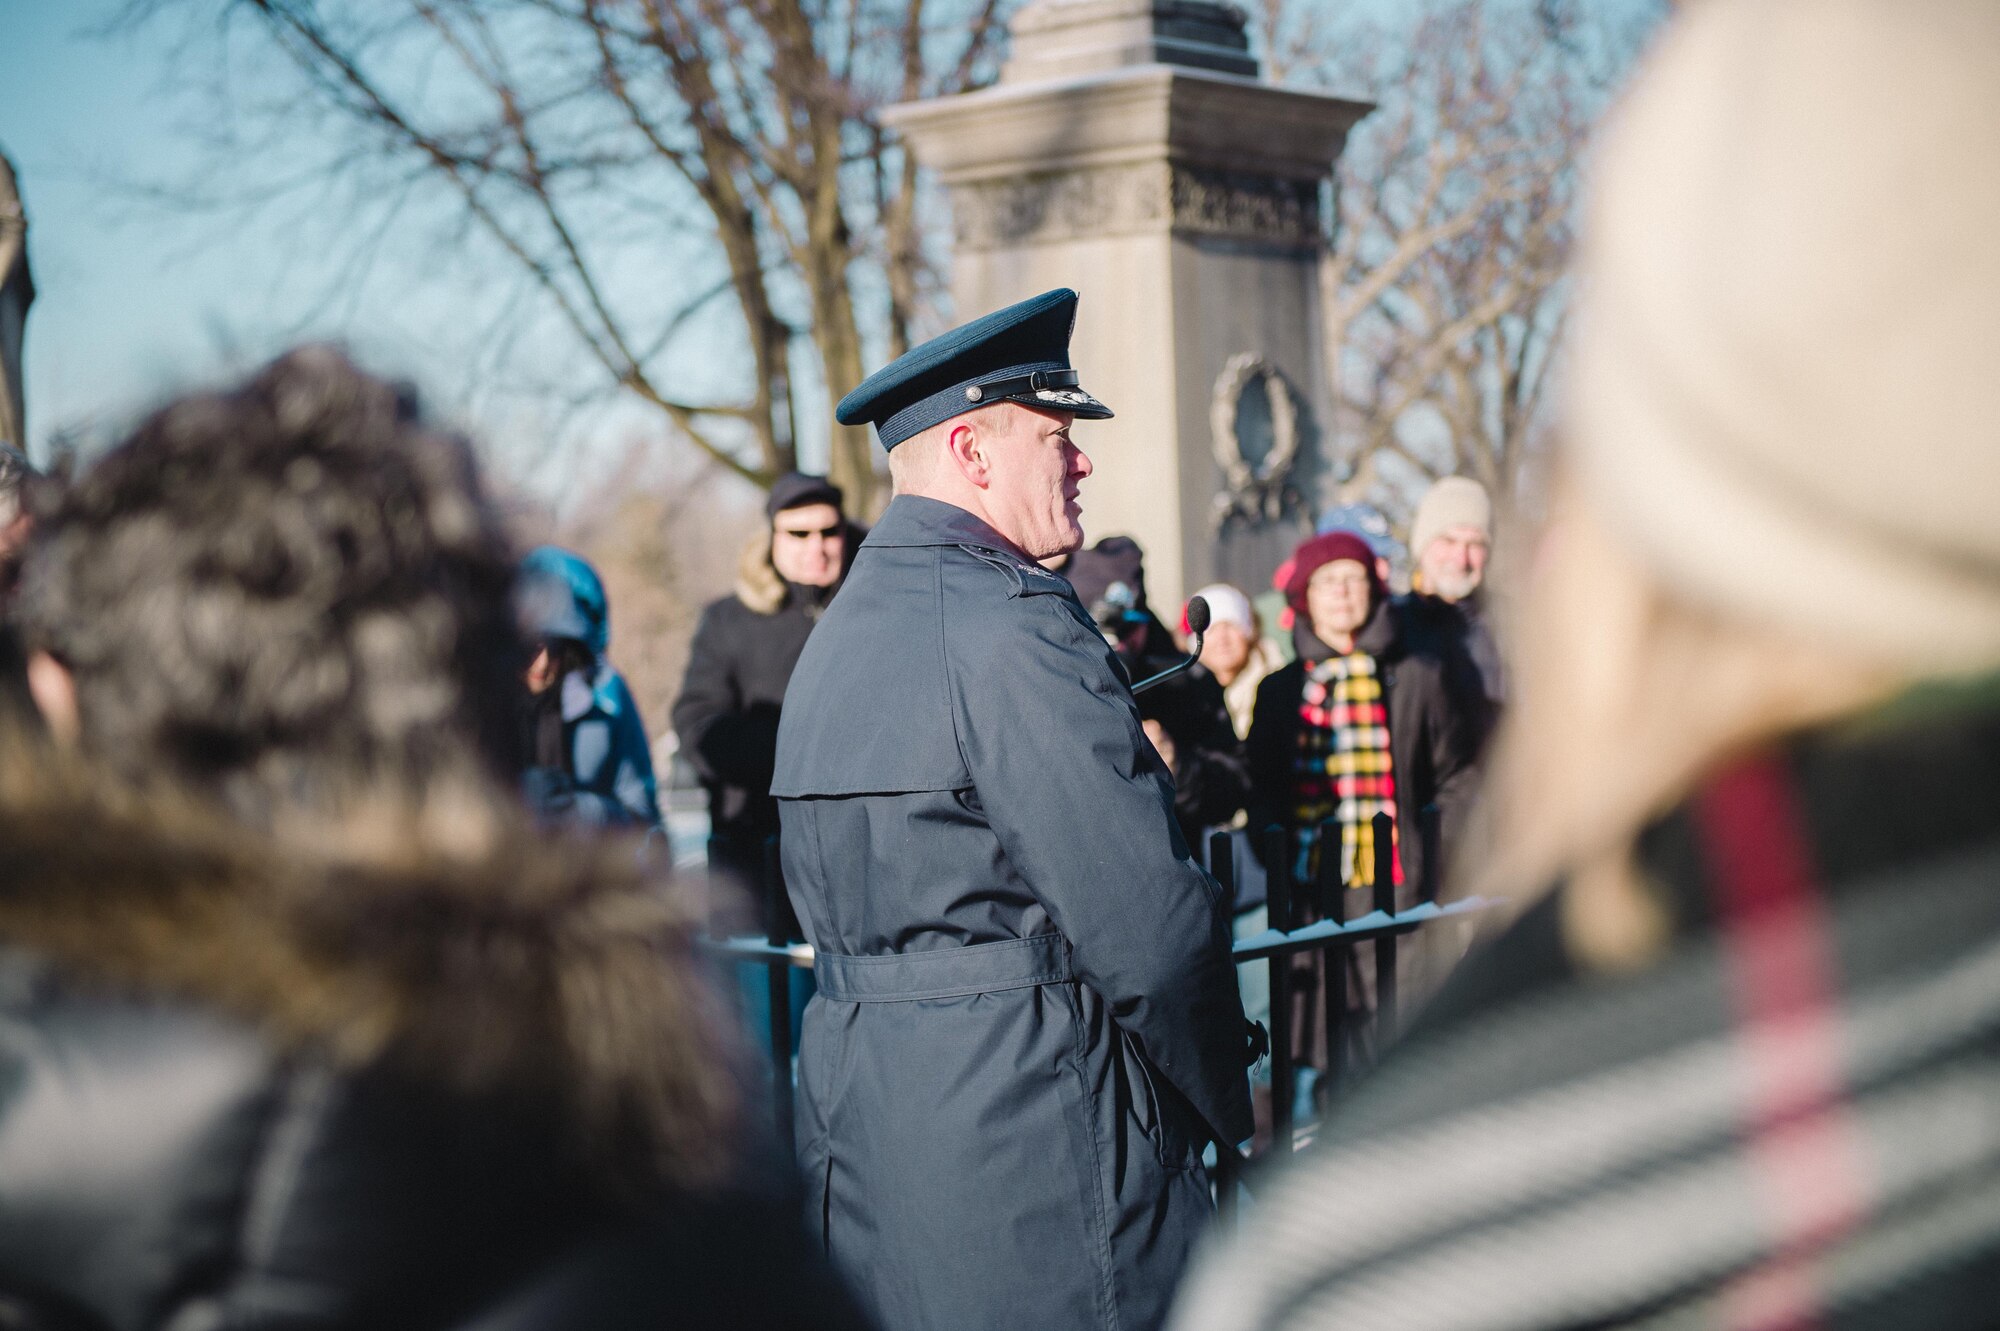 Col. Gary R. Charlton, vice commander of the 107th Airlift Wing, Niagara Falls Air Reserve Station, delivers remarks after presenting a wreath at the grave of President Millard Fillmore, on behalf of President Barack Obama, Forest Lawn Cemetery, Buffalo, N.Y., Jan. 6, 2017. The ceremony, which is held by the University at Buffalo, a school which Fillmore was one of the founders, commemorates the former president's birthday. (U.S. Air Force Photo by Staff Sgt. Ryan Campbell)